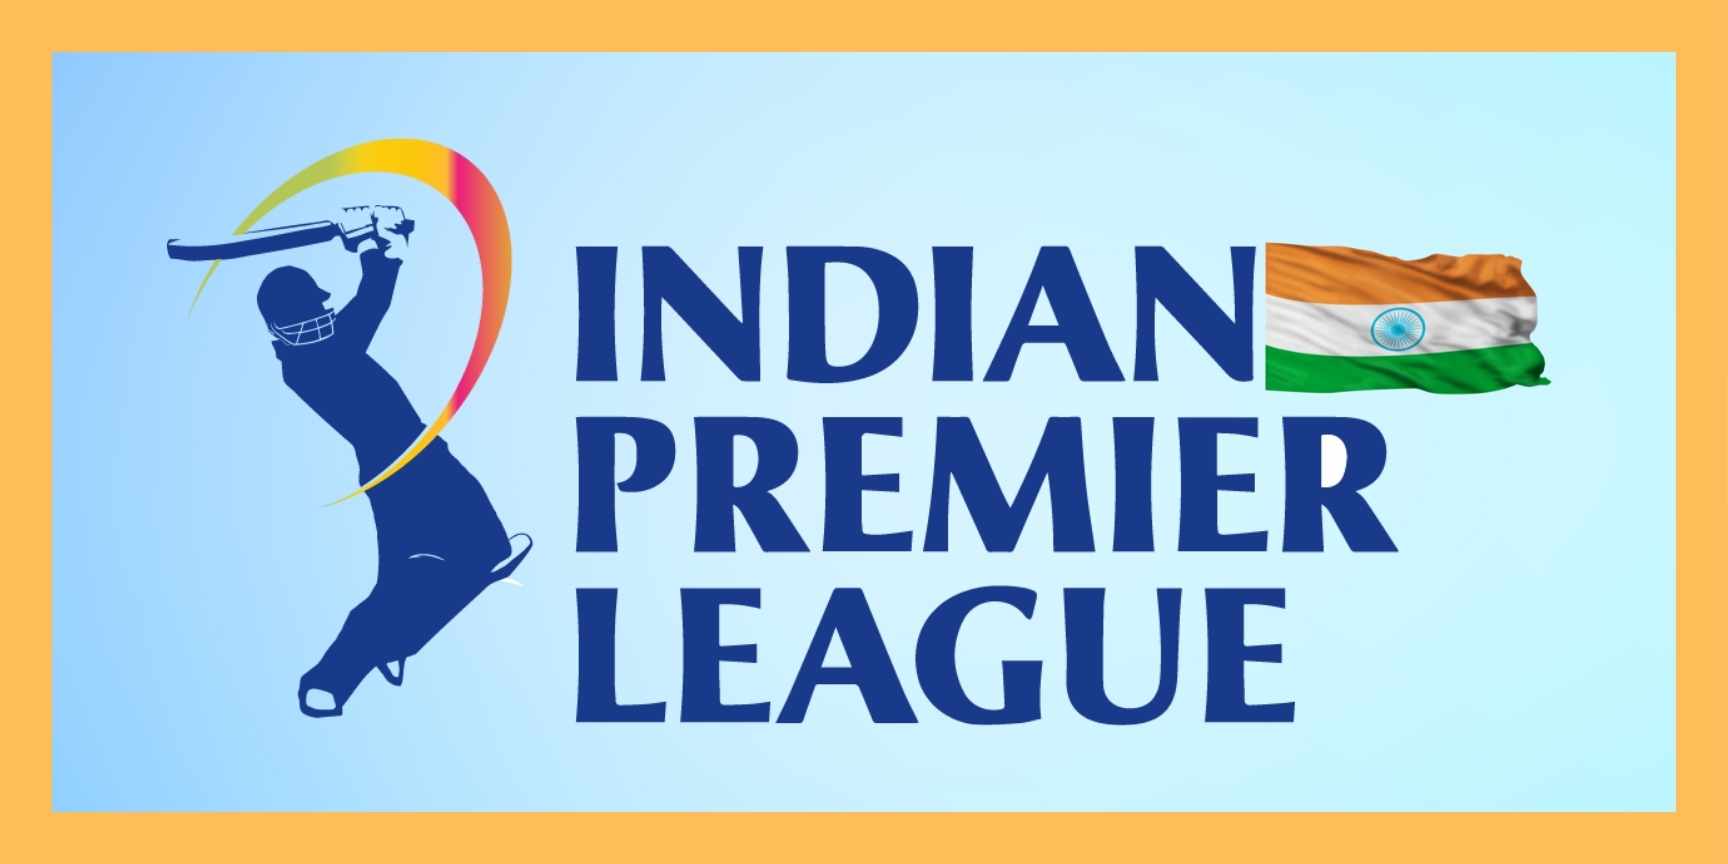 IPL is considered the largest cricket league